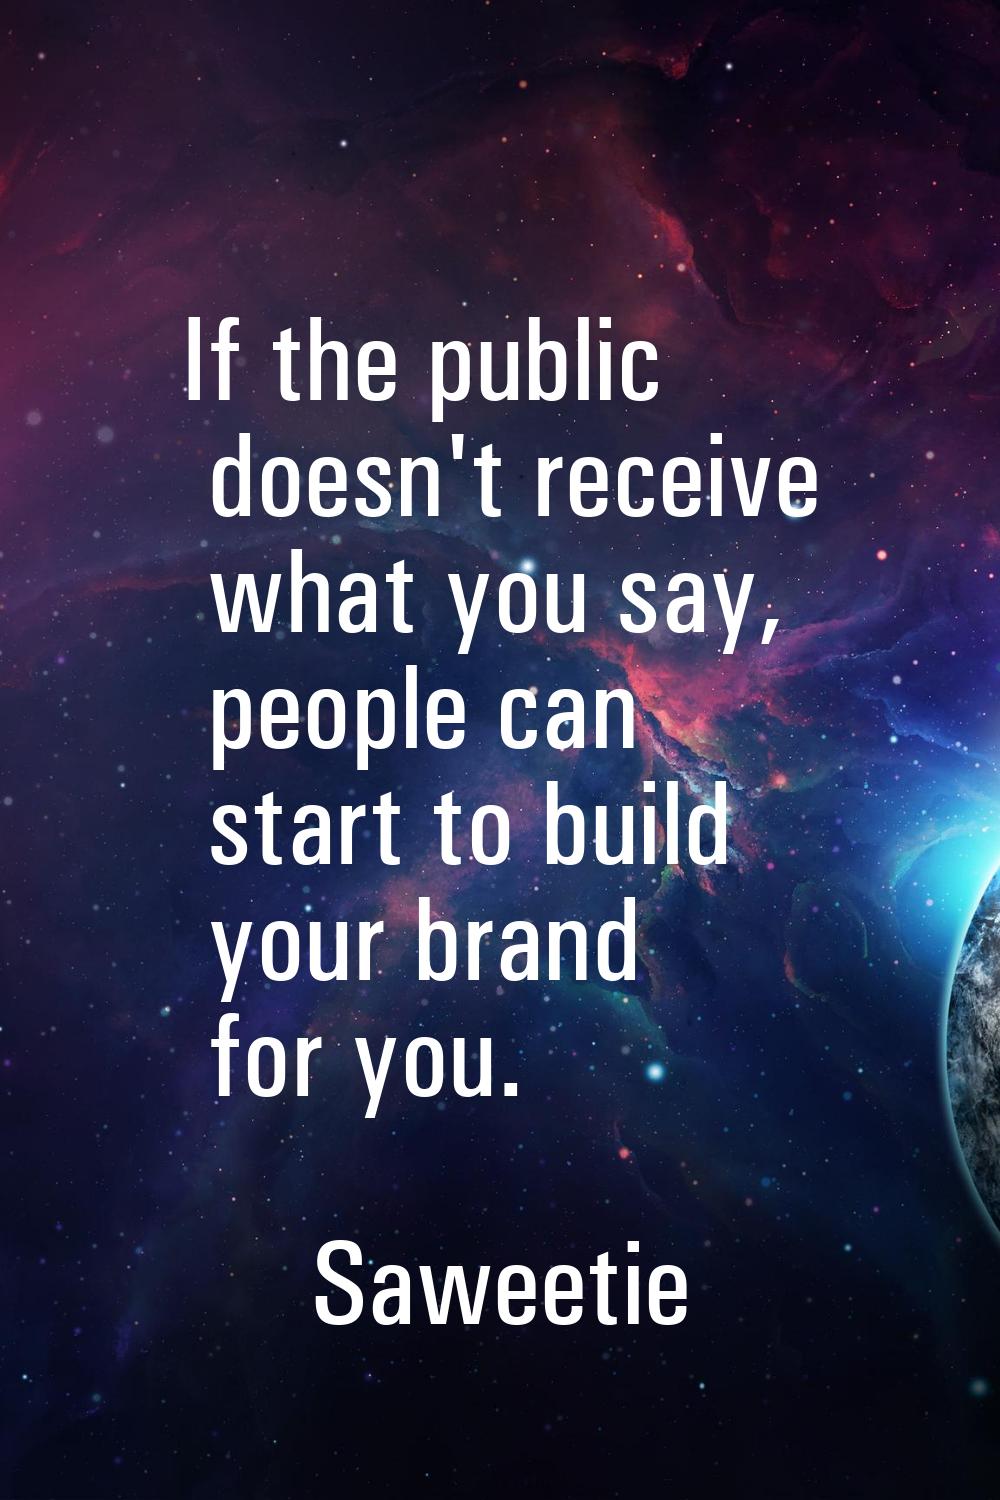 If the public doesn't receive what you say, people can start to build your brand for you.